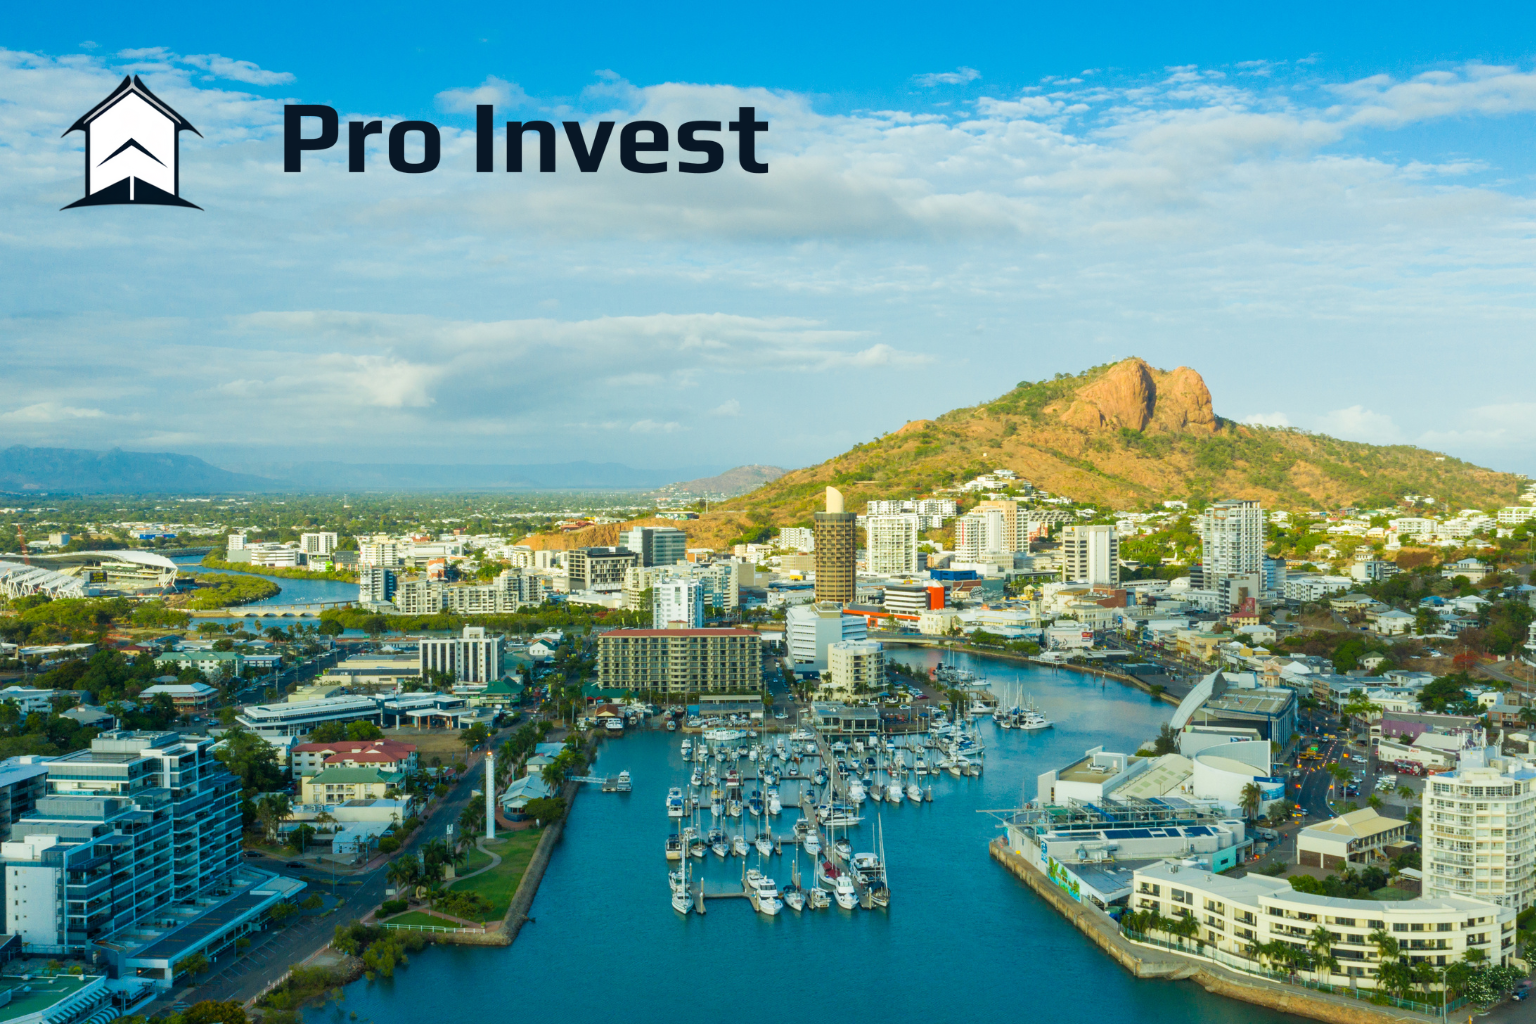 Property Investment Report of Townsville Queensland